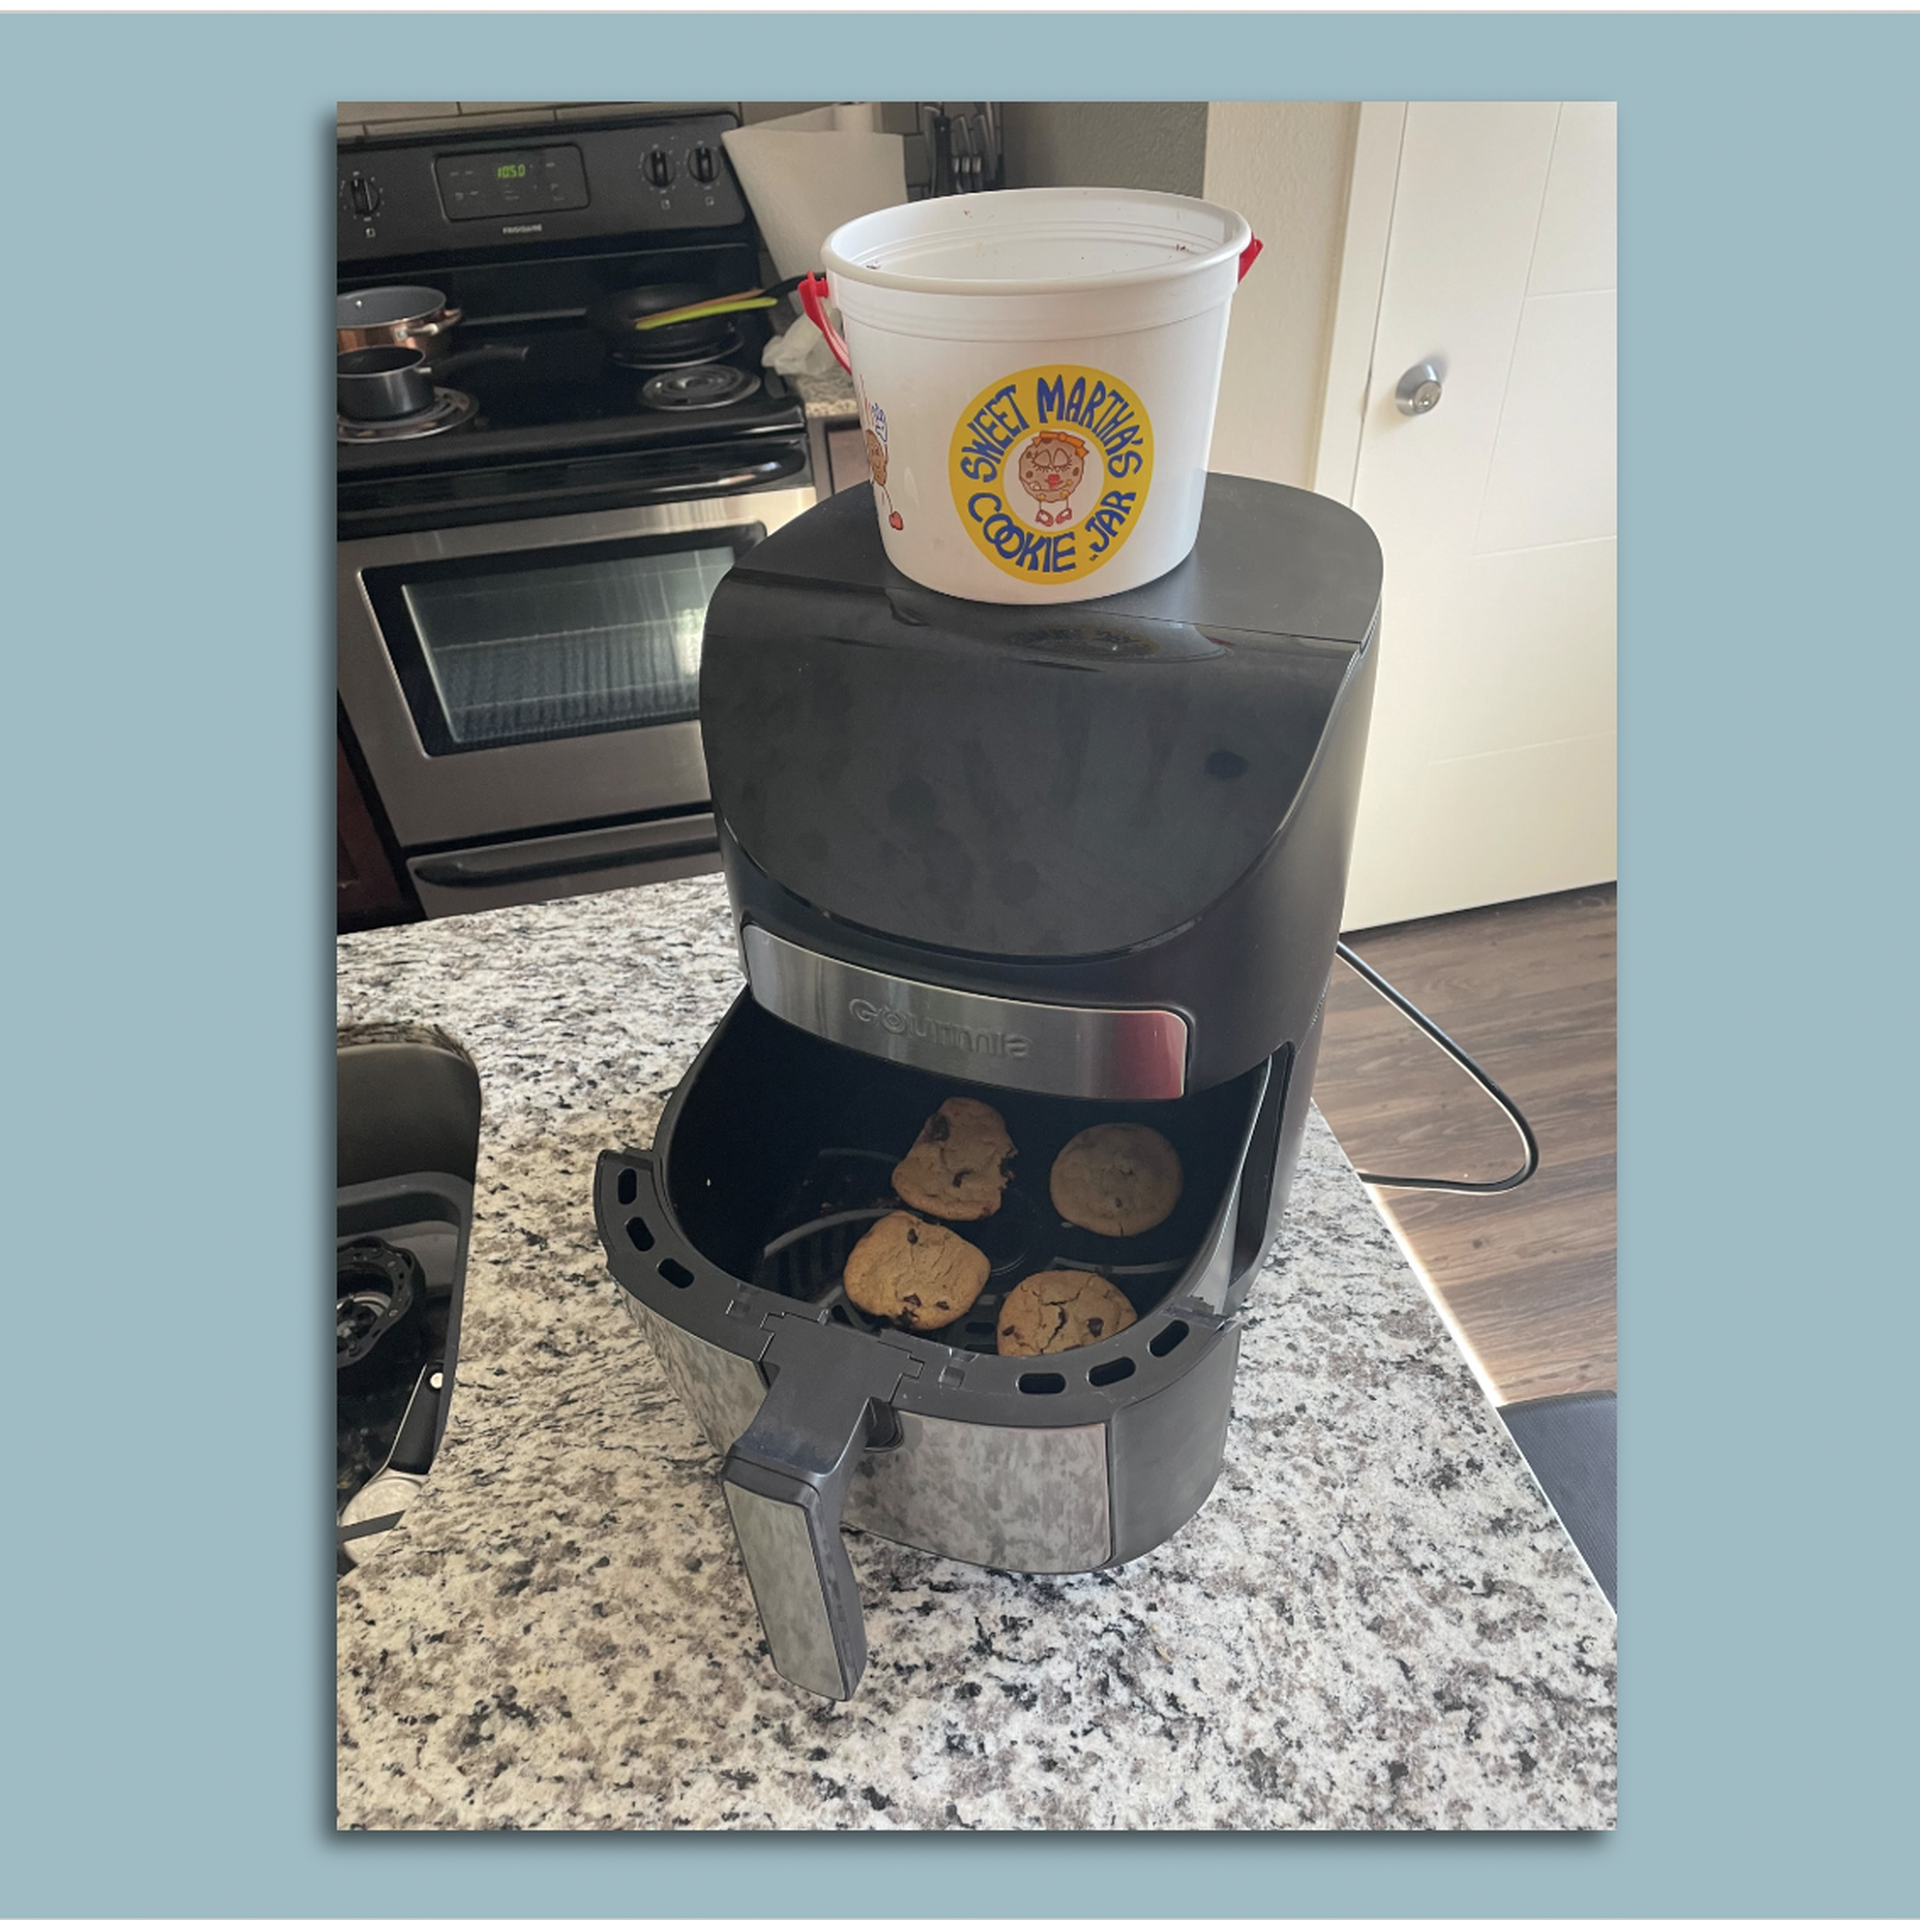 cookies and an air fyer